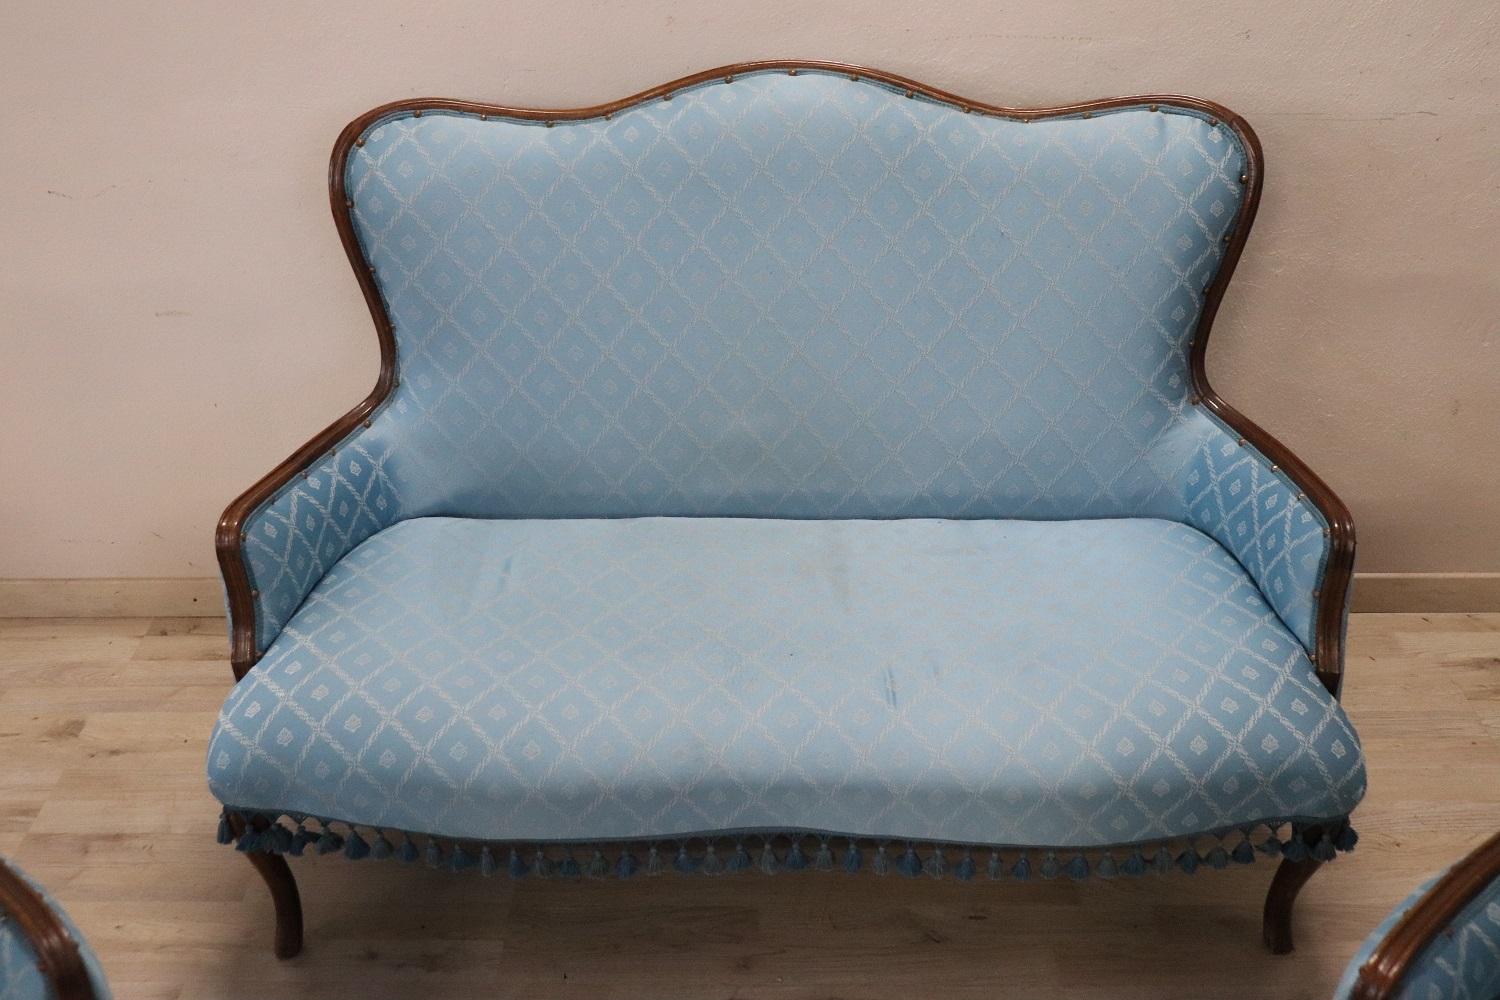 Beautiful complete Italian luxury Louis Philippe style 1930s living room set includes:
1 sofa
2 armchairs
Refined living room set in beech wood. The living room comes from an important Italian villa and embellished the room for relaxation and